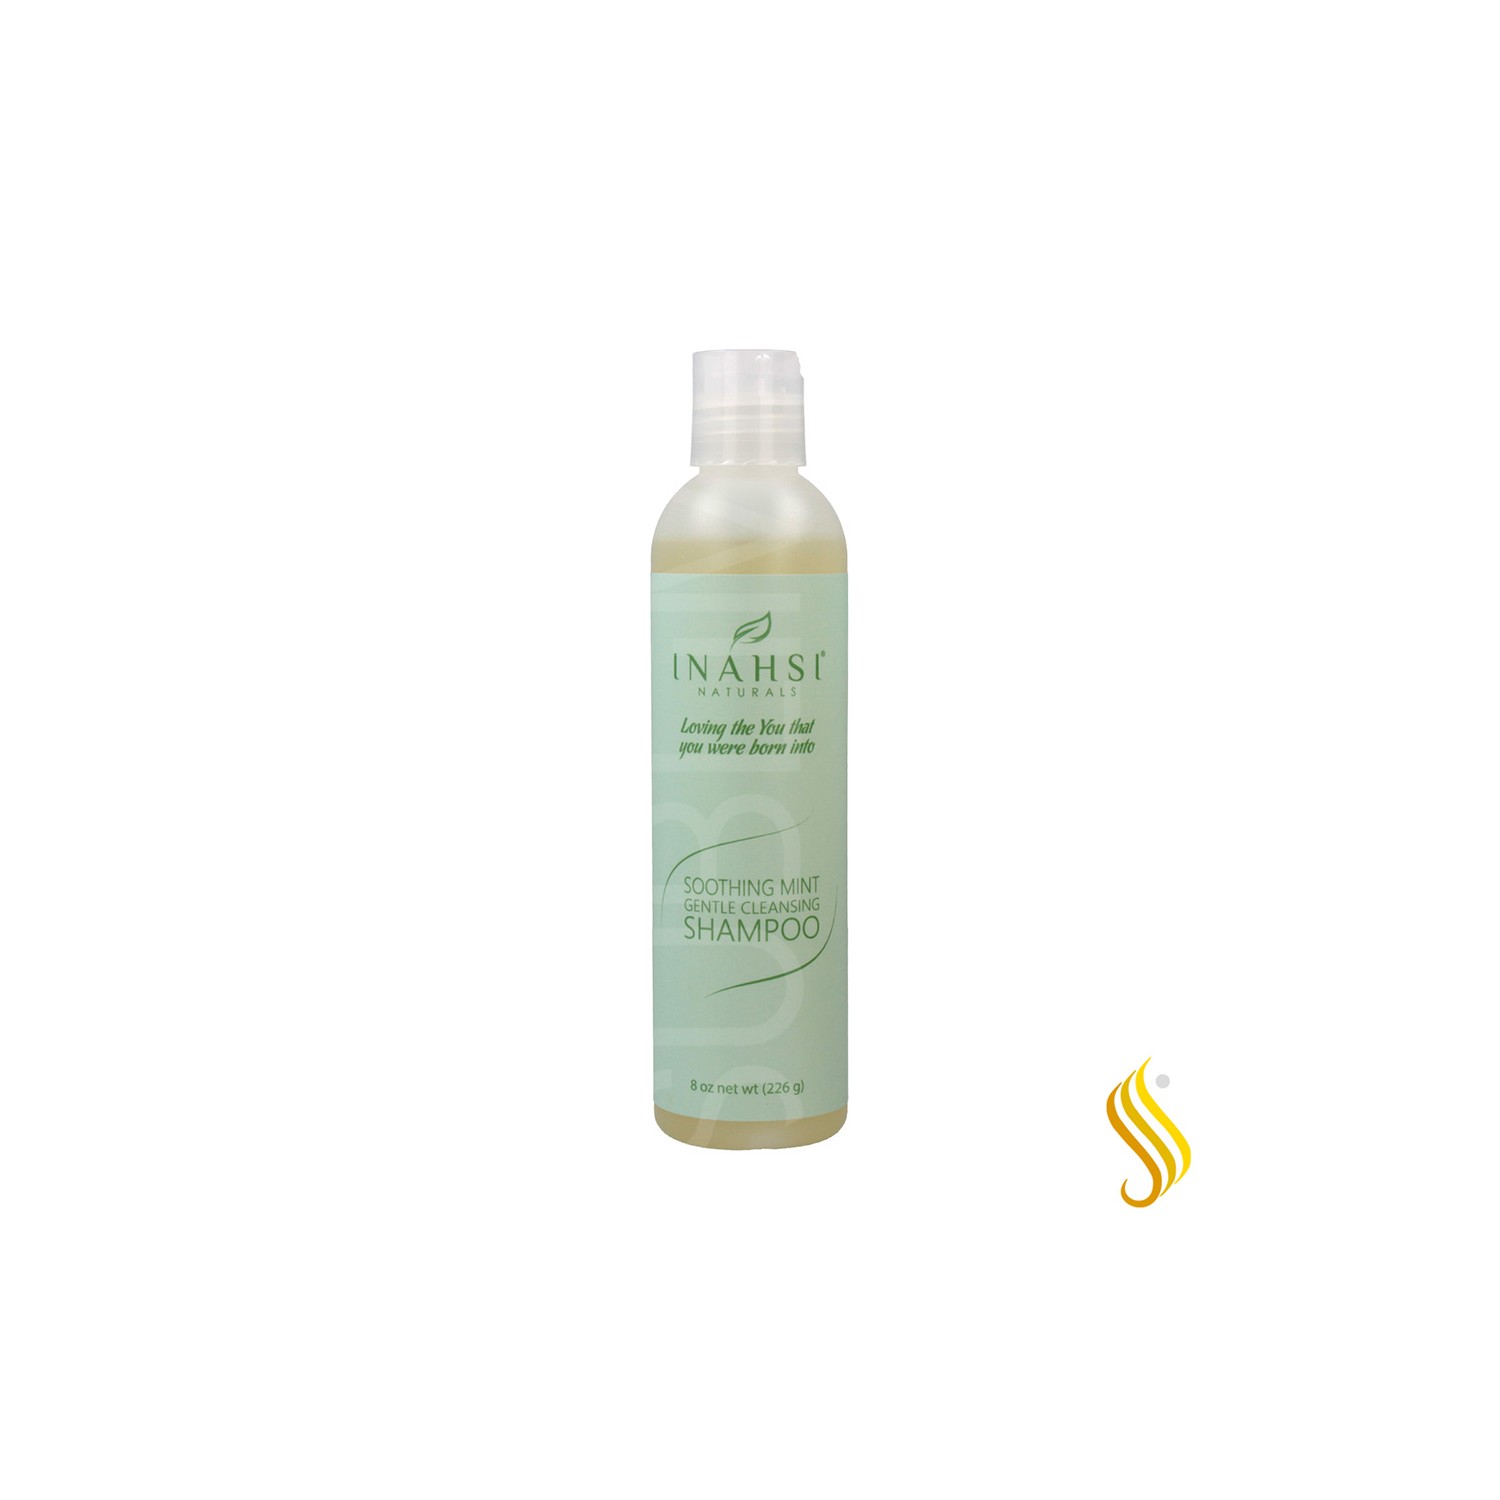 Inahsi Soothing Mint Gentle Cleansing Shampoo 226 gr